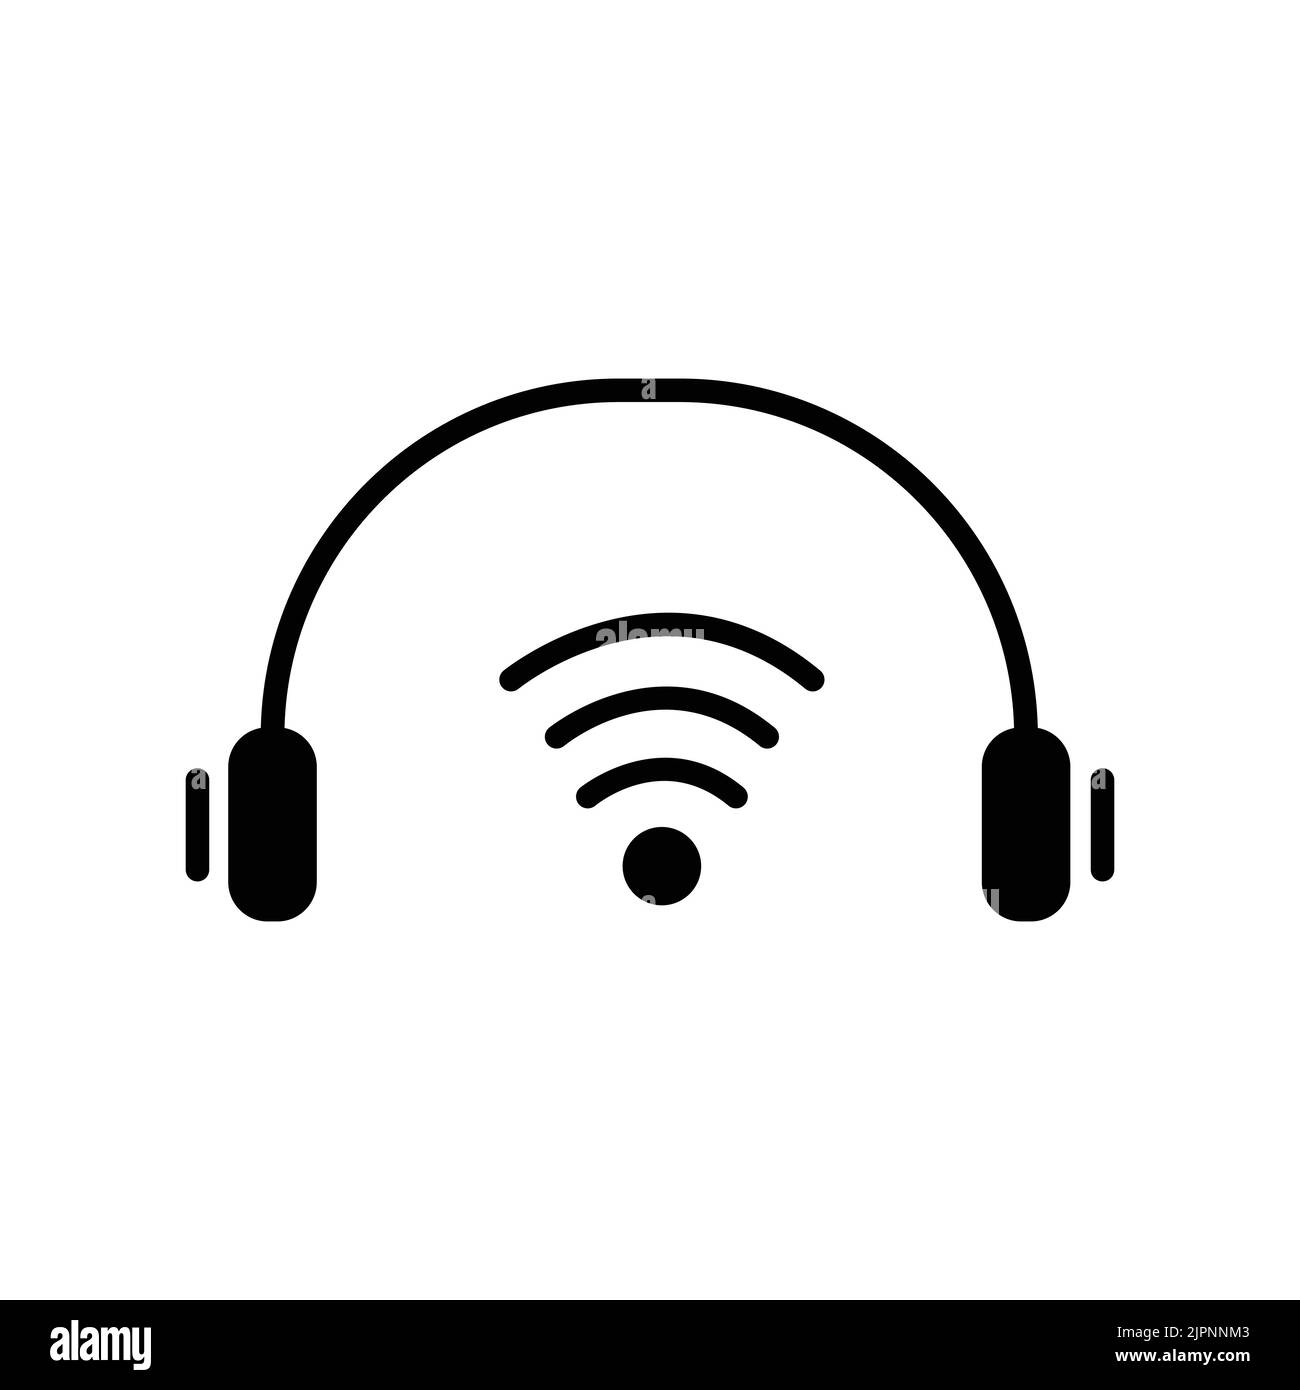 Headphone icon with signal. icon related to electronic, technology, smart device. Glyph icon style, solid. Simple design editable Stock Vector